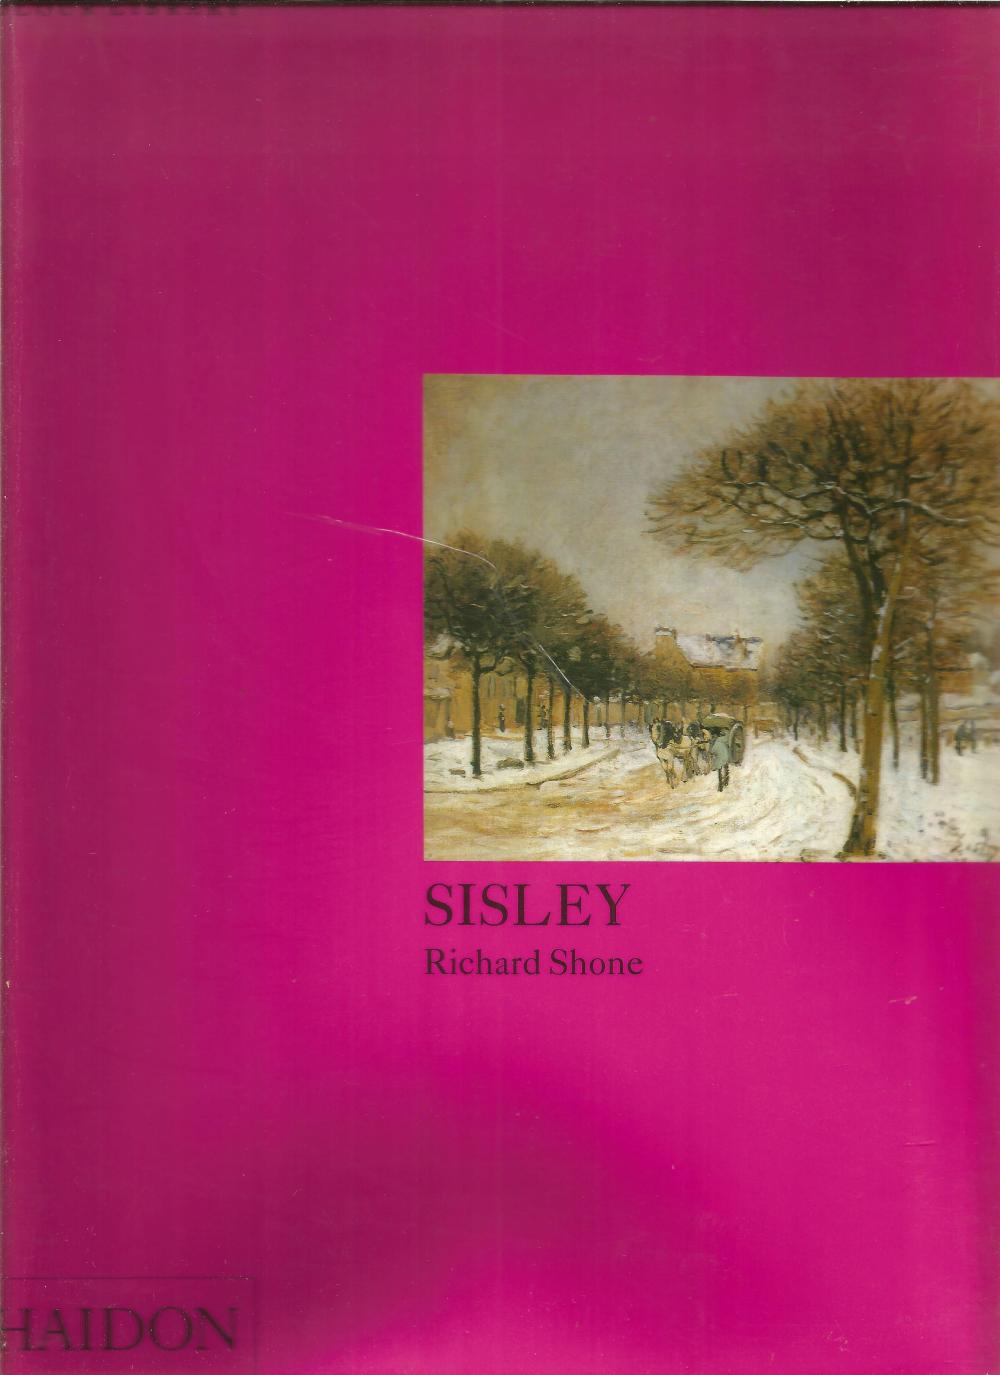 Sisley by Richard Shone. Unsigned large hardback book with dust jacket published in 1994 in London